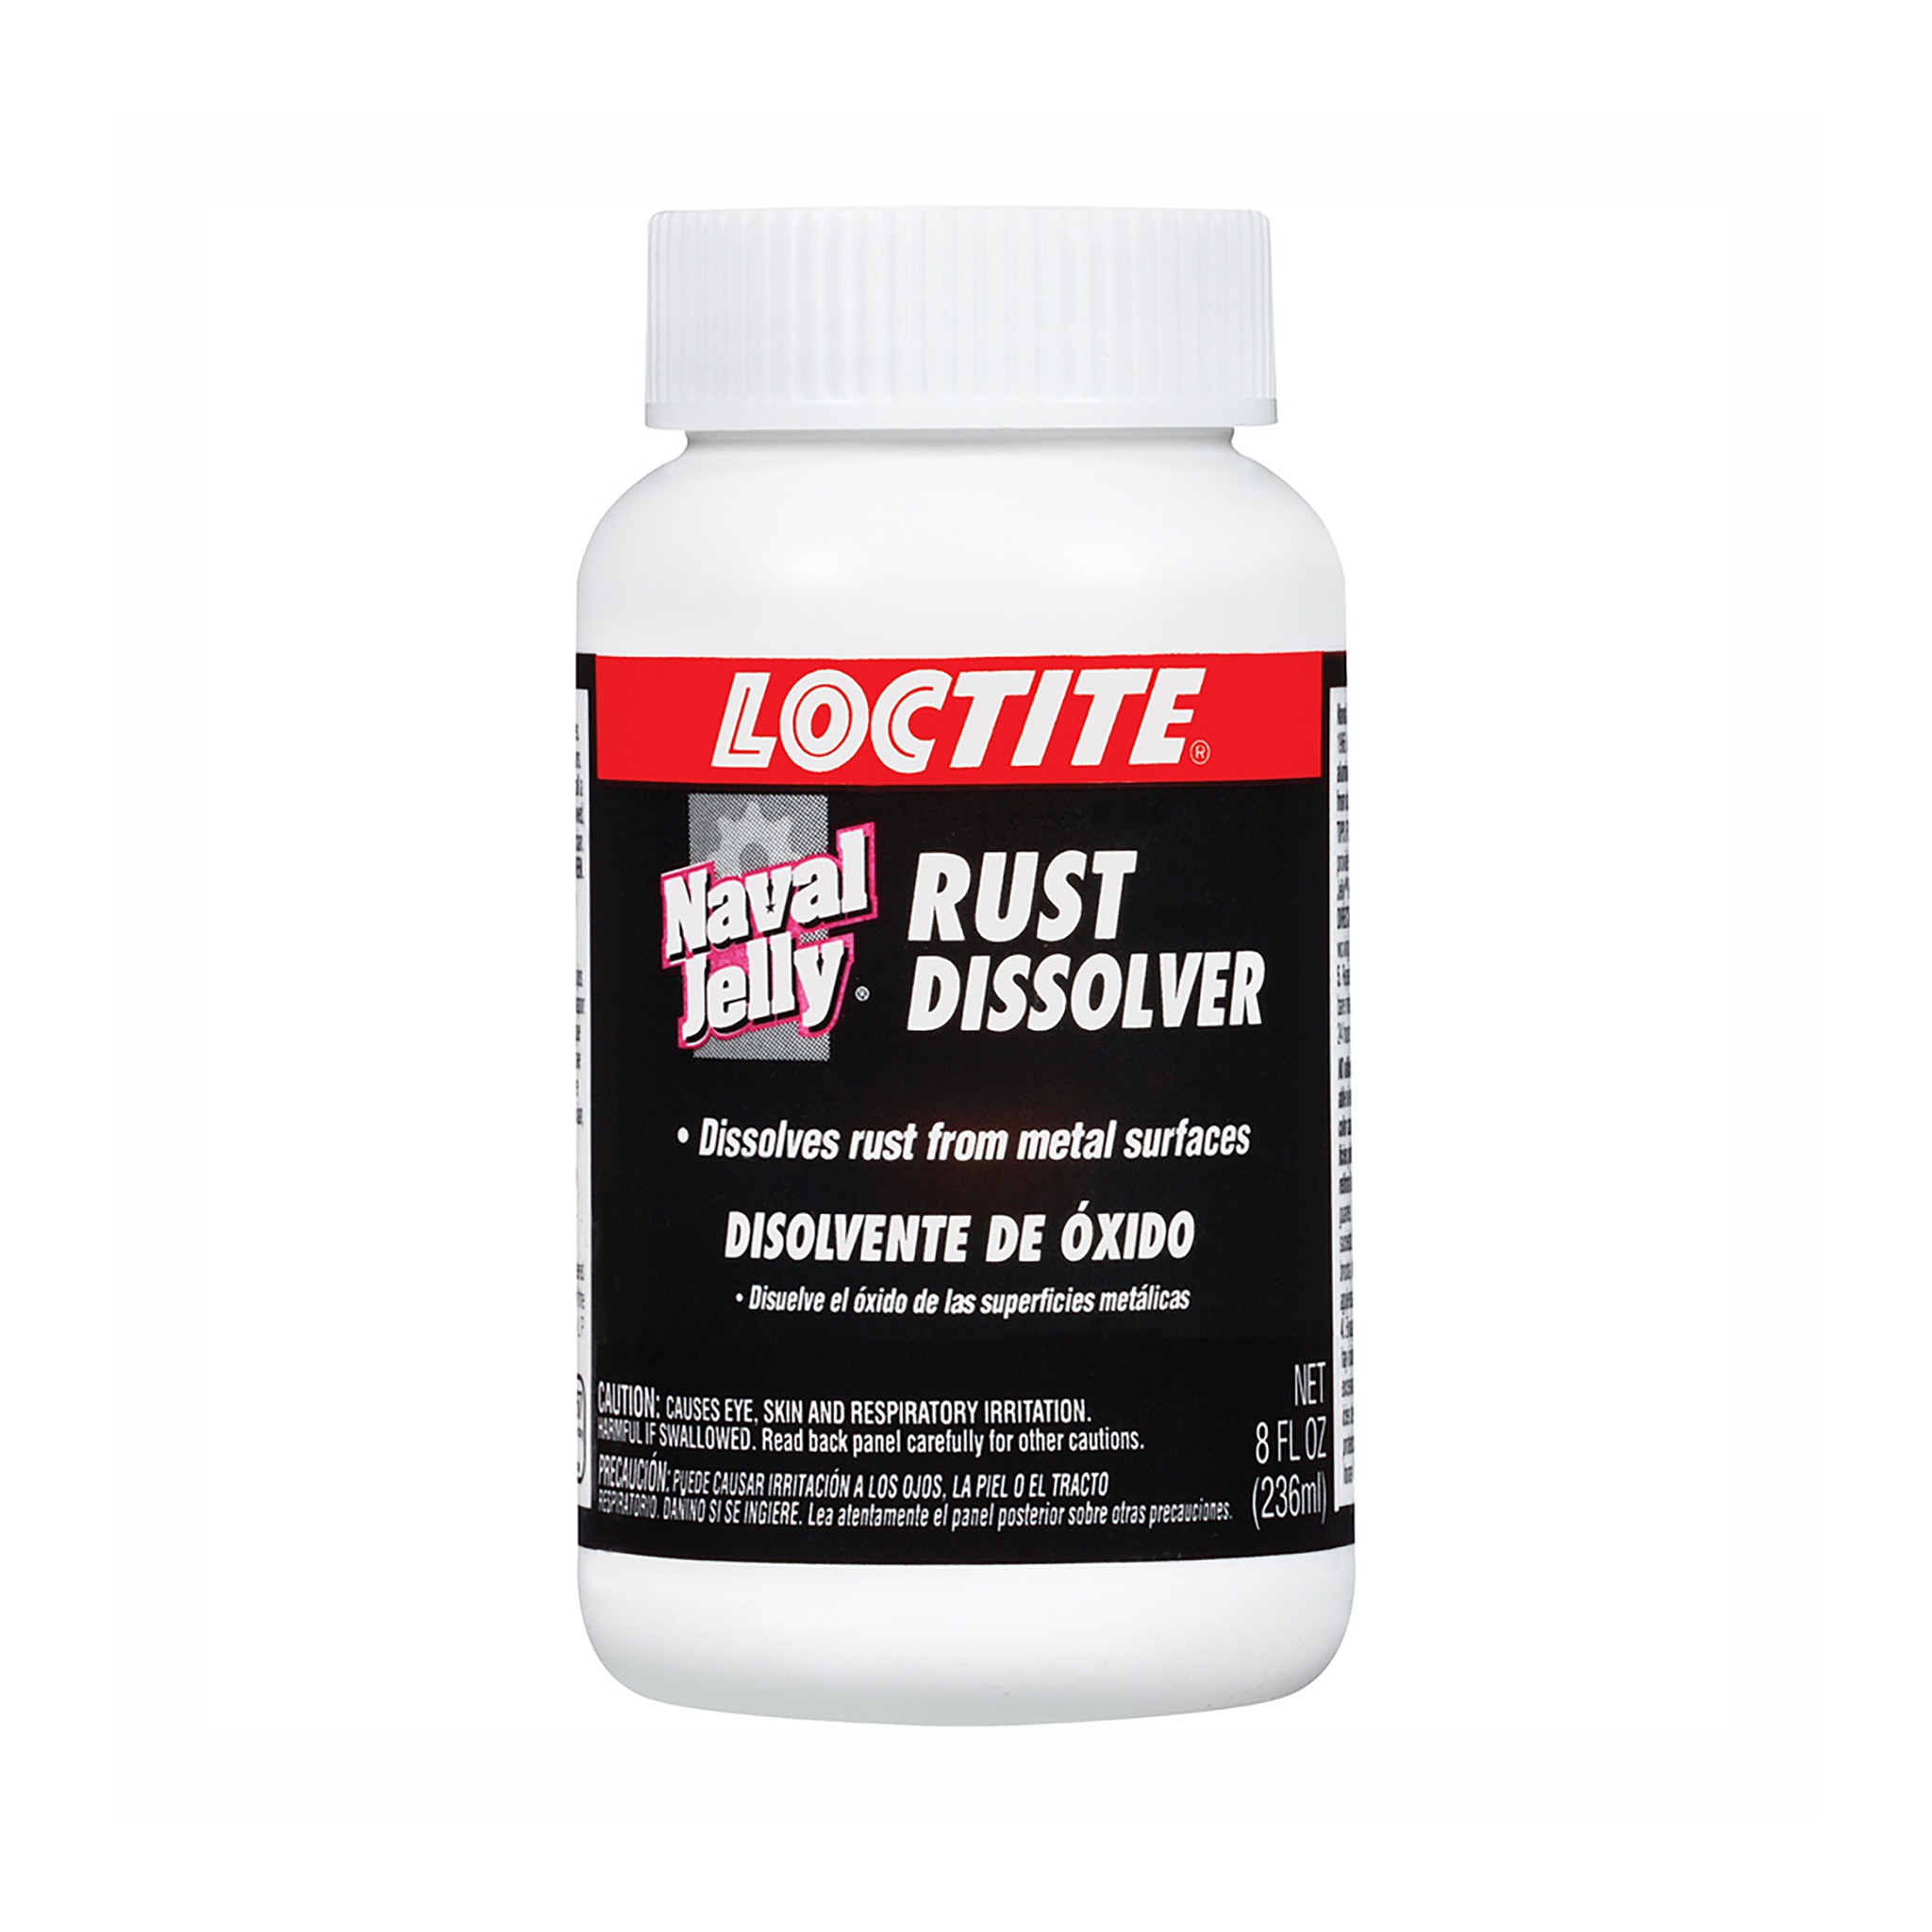 Loctite Rust Dissolver Naval Jelly - Product Review (Andy's Garage: Episode  - 137) 